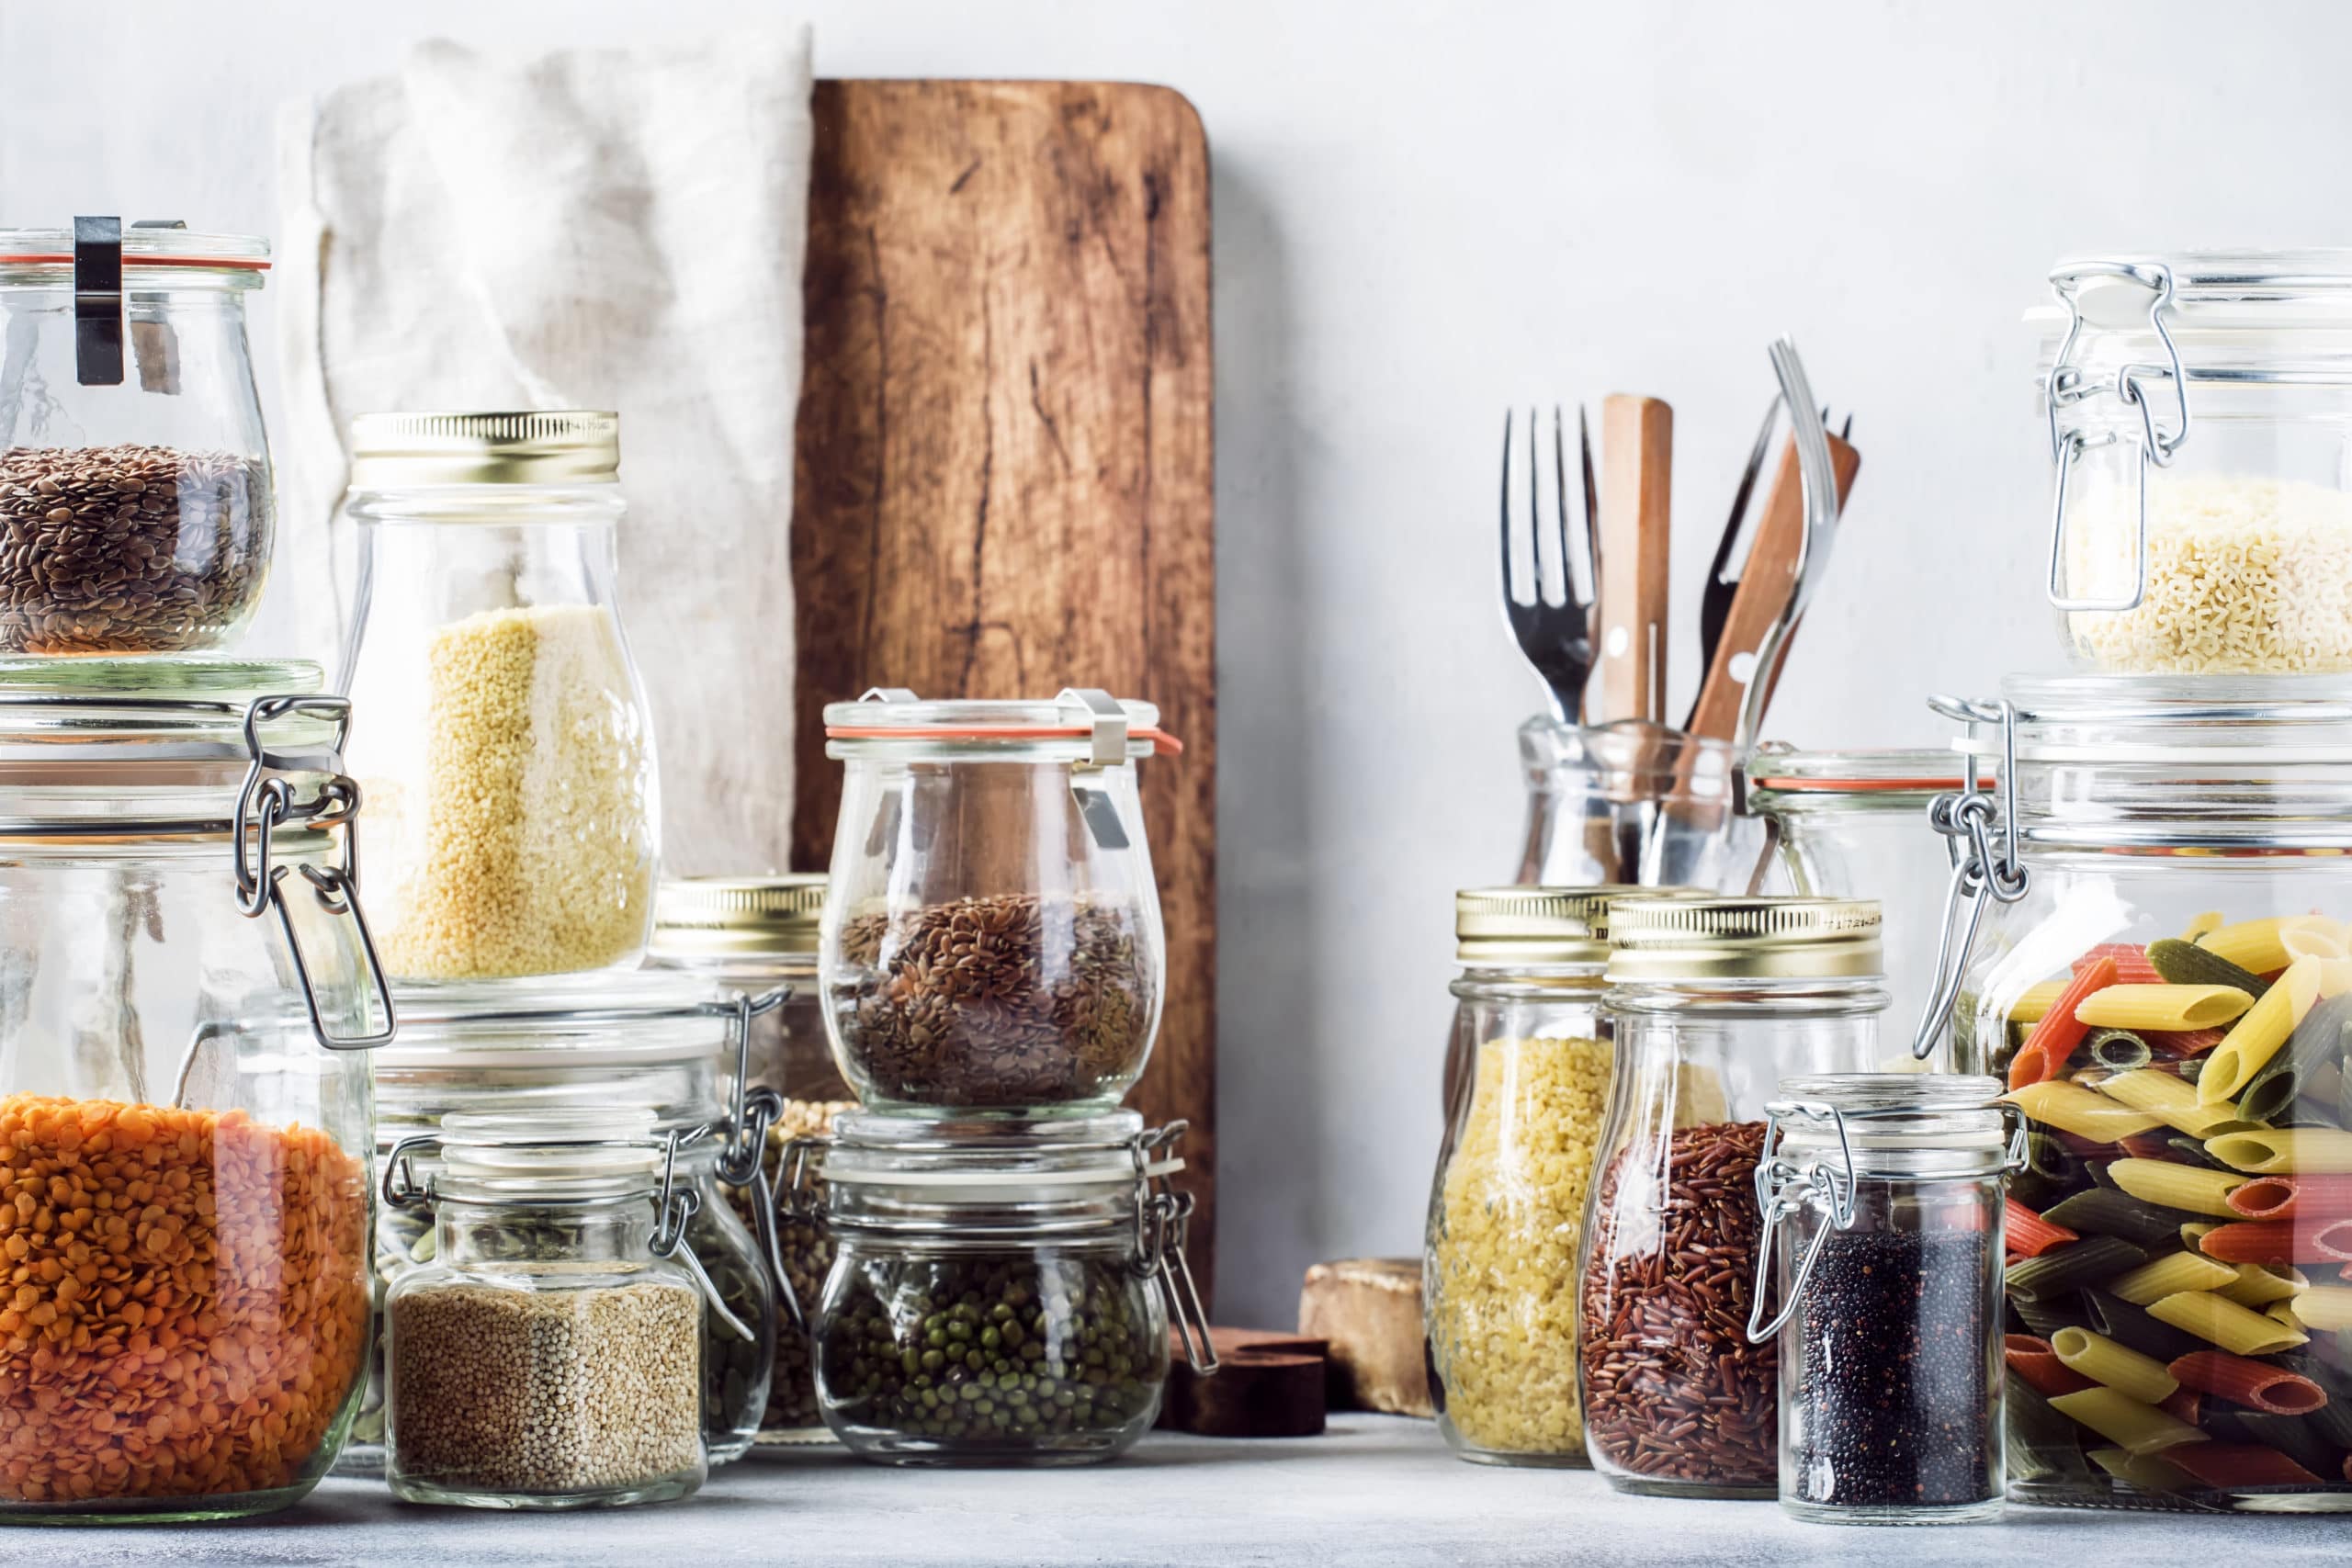 10 Pantry Essentials to Always Have on Hand